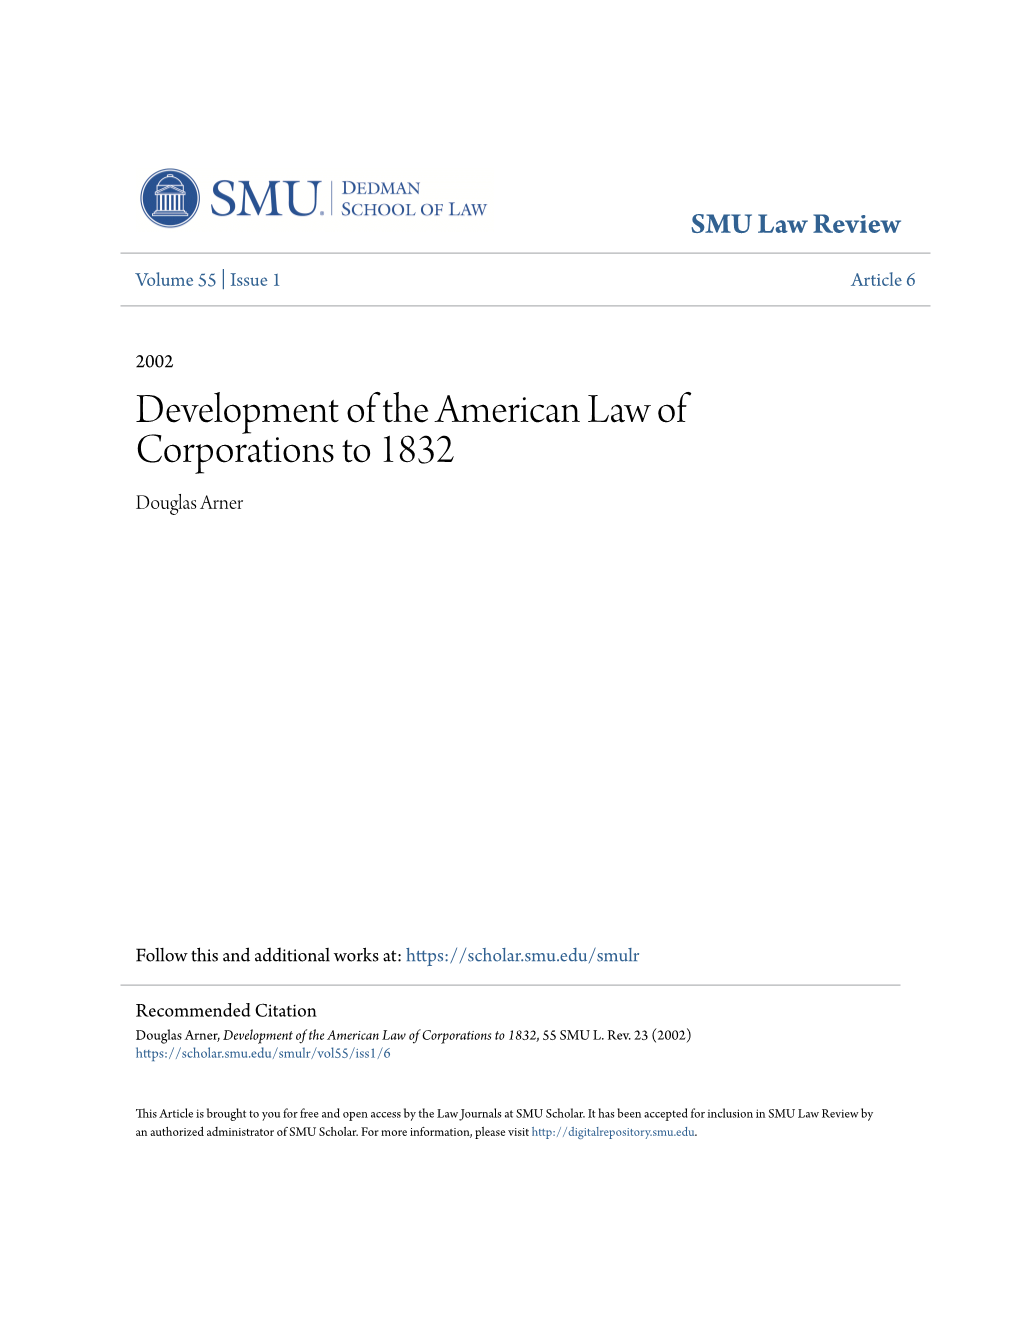 Development of the American Law of Corporations to 1832 Douglas Arner